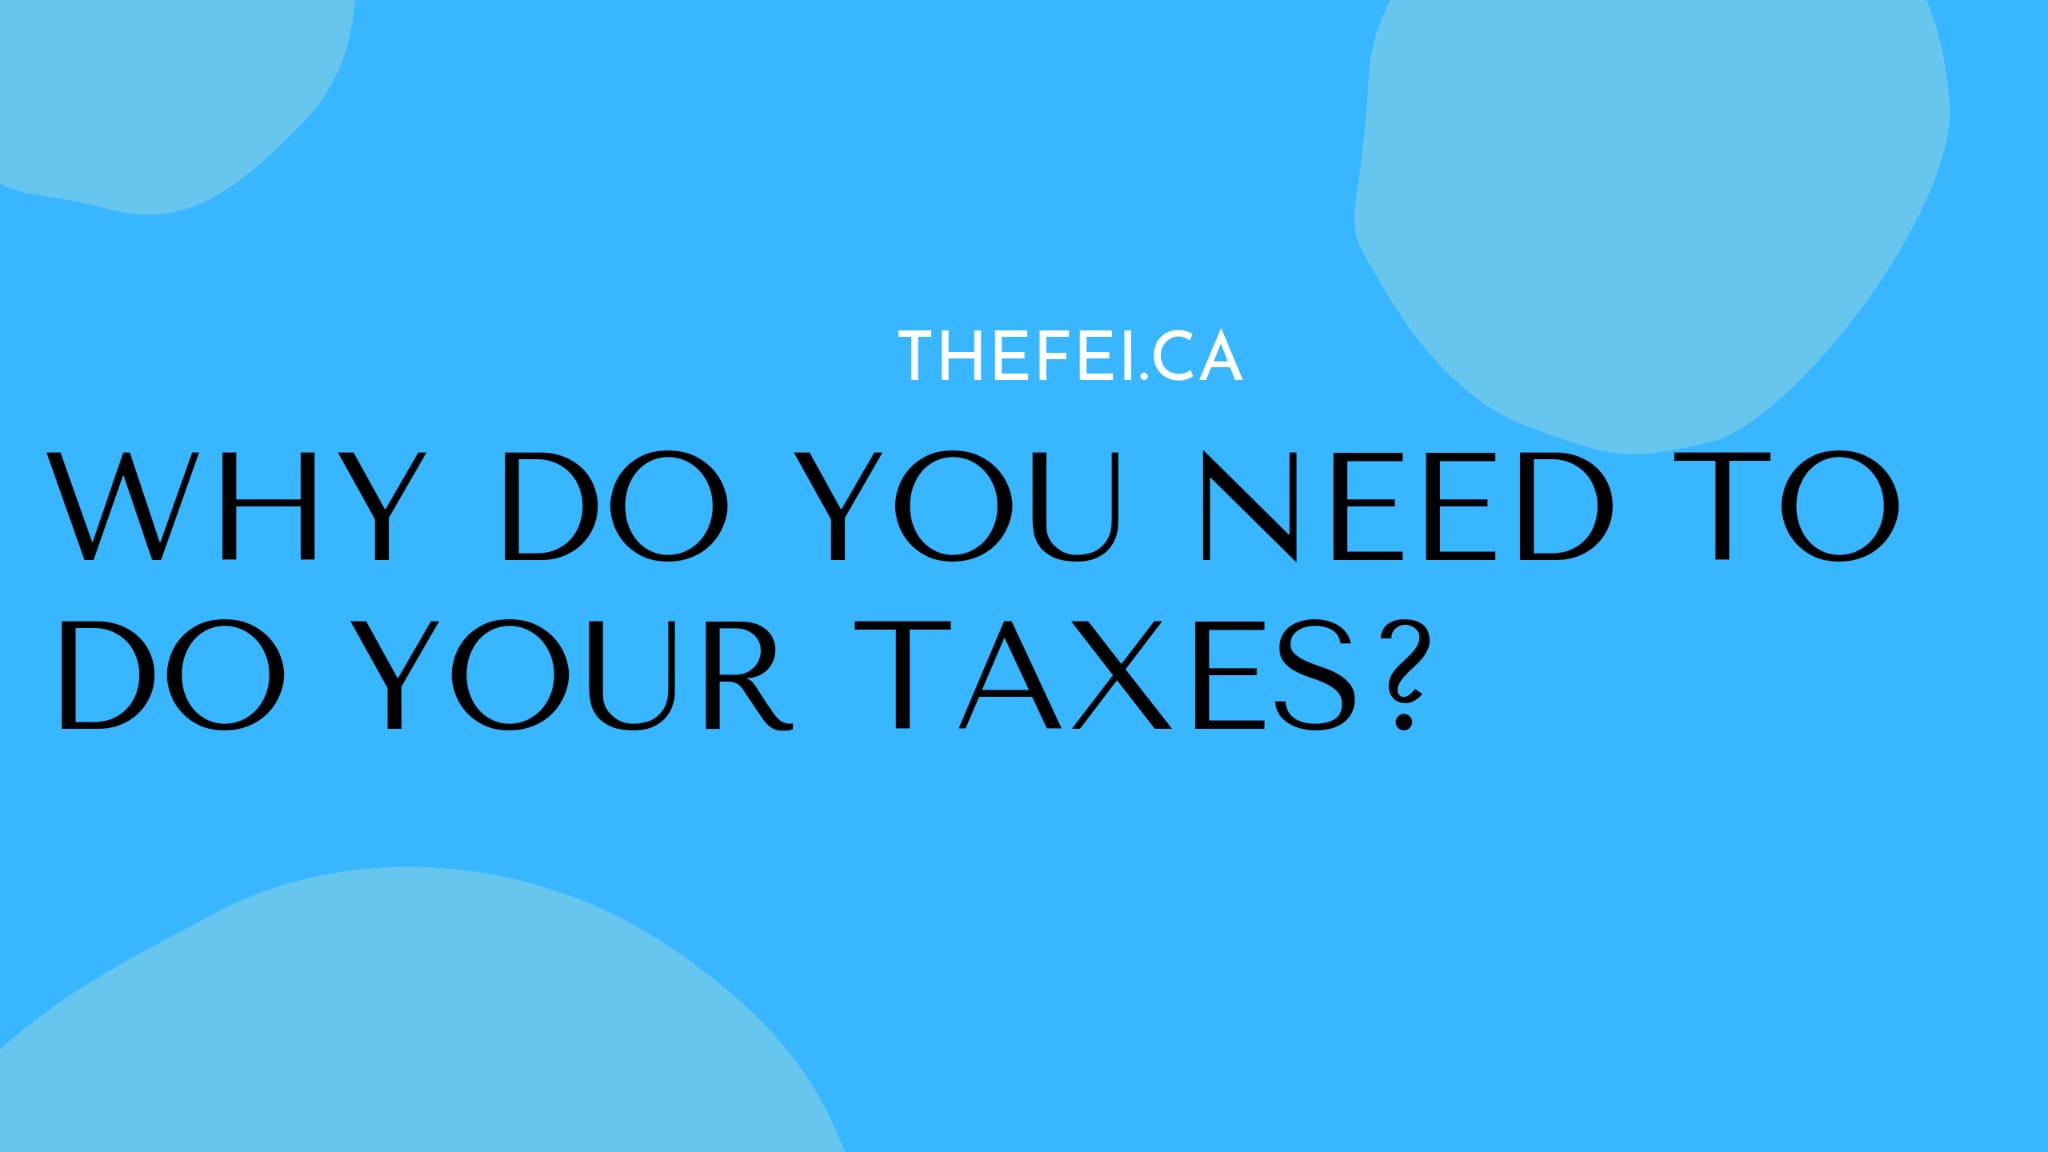 Why do you need to do your taxes?